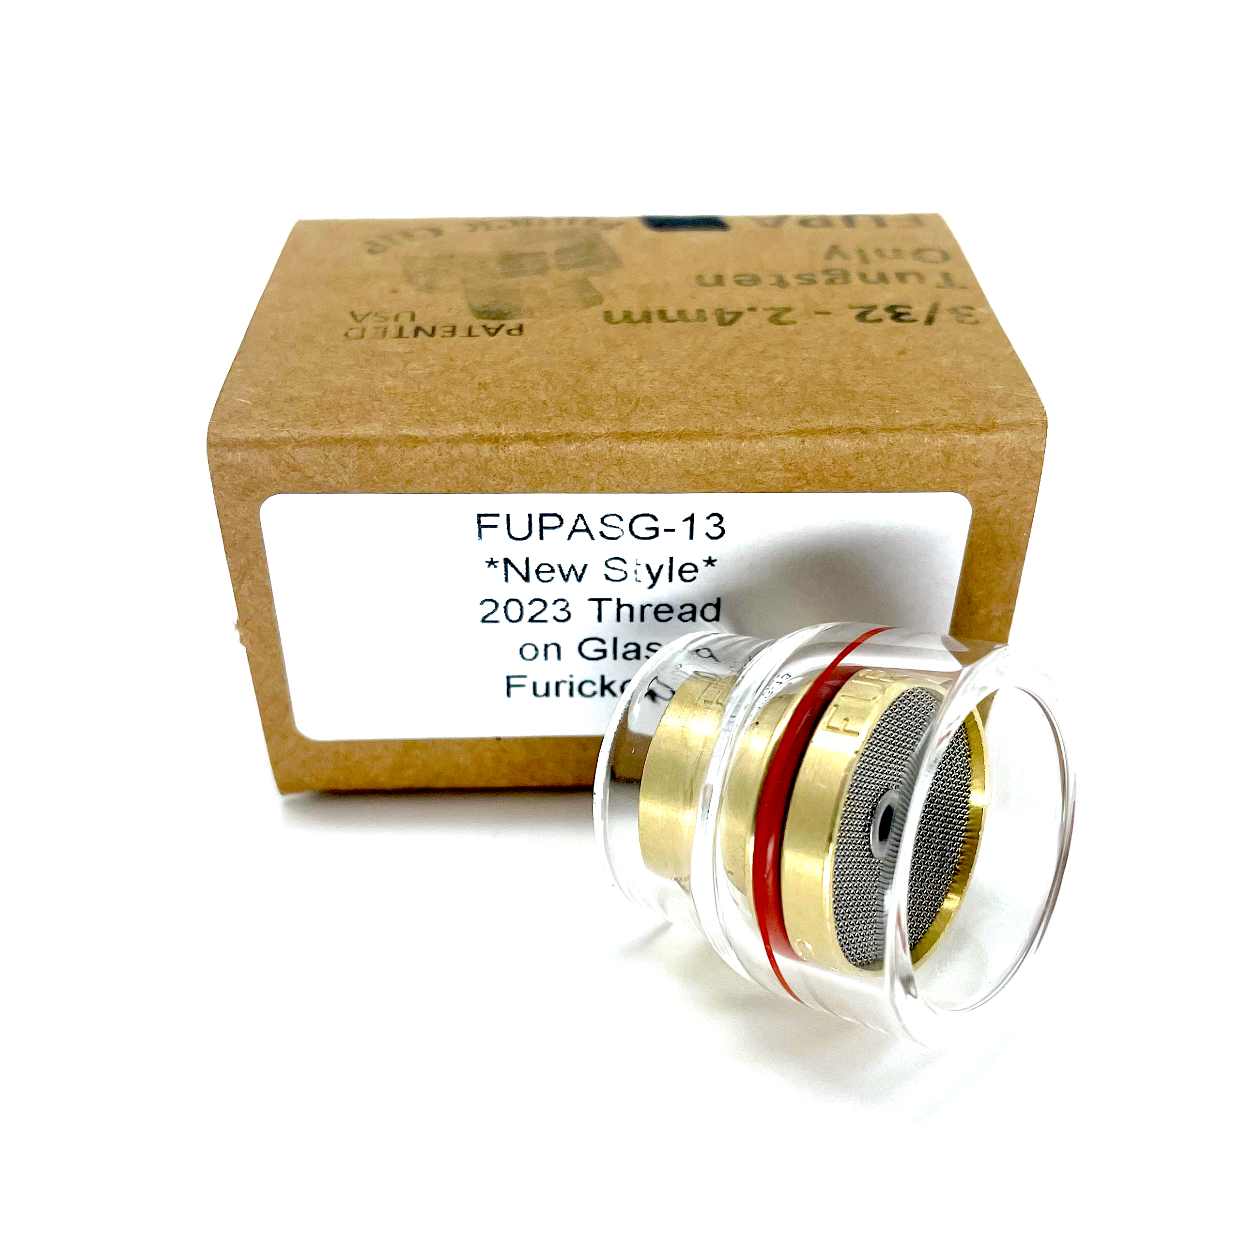 FUPA 12 Ceramic Cup Complete Kit for 17, 18, & 26 Series TIG Torches